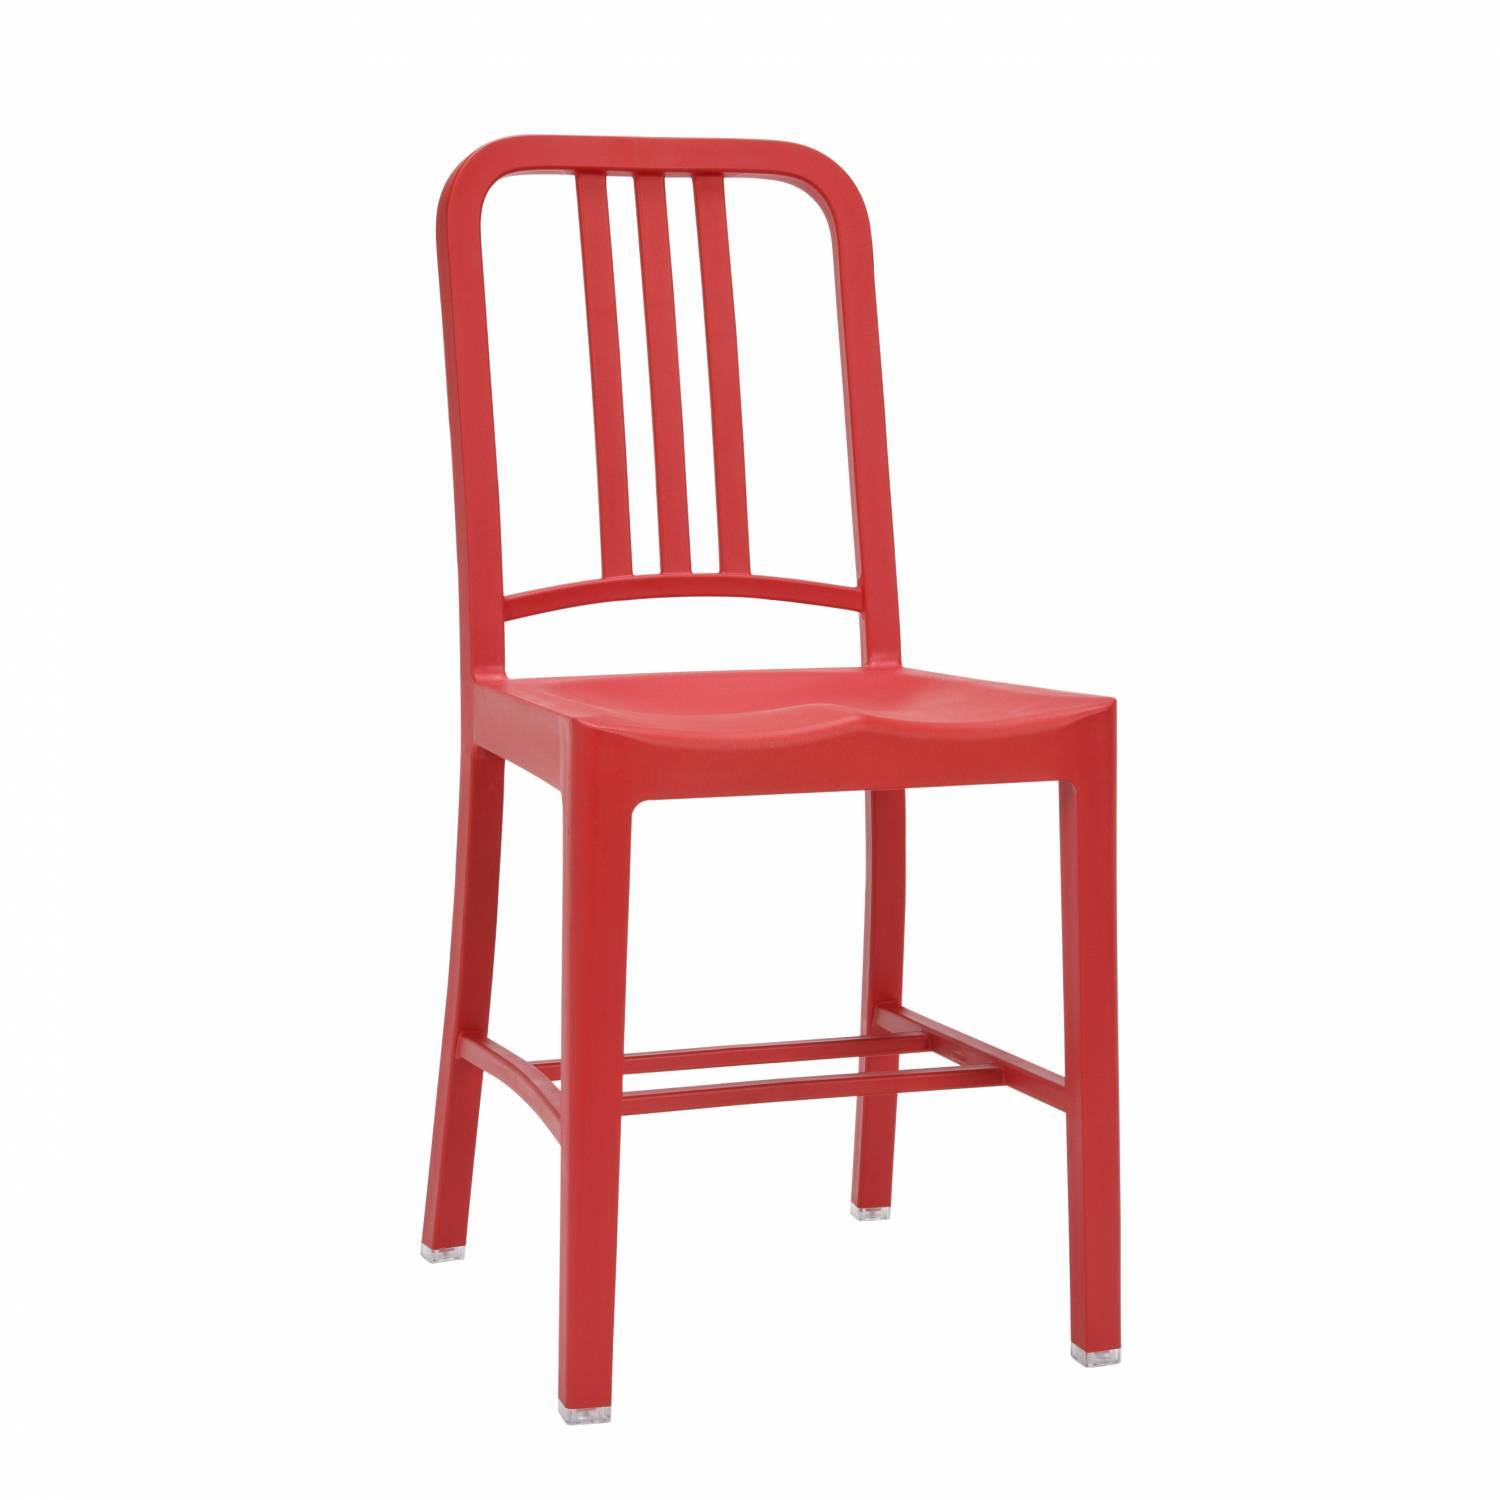 Emeco Style Navy Plastic Chair (Red) - Nathan Rhodes Design